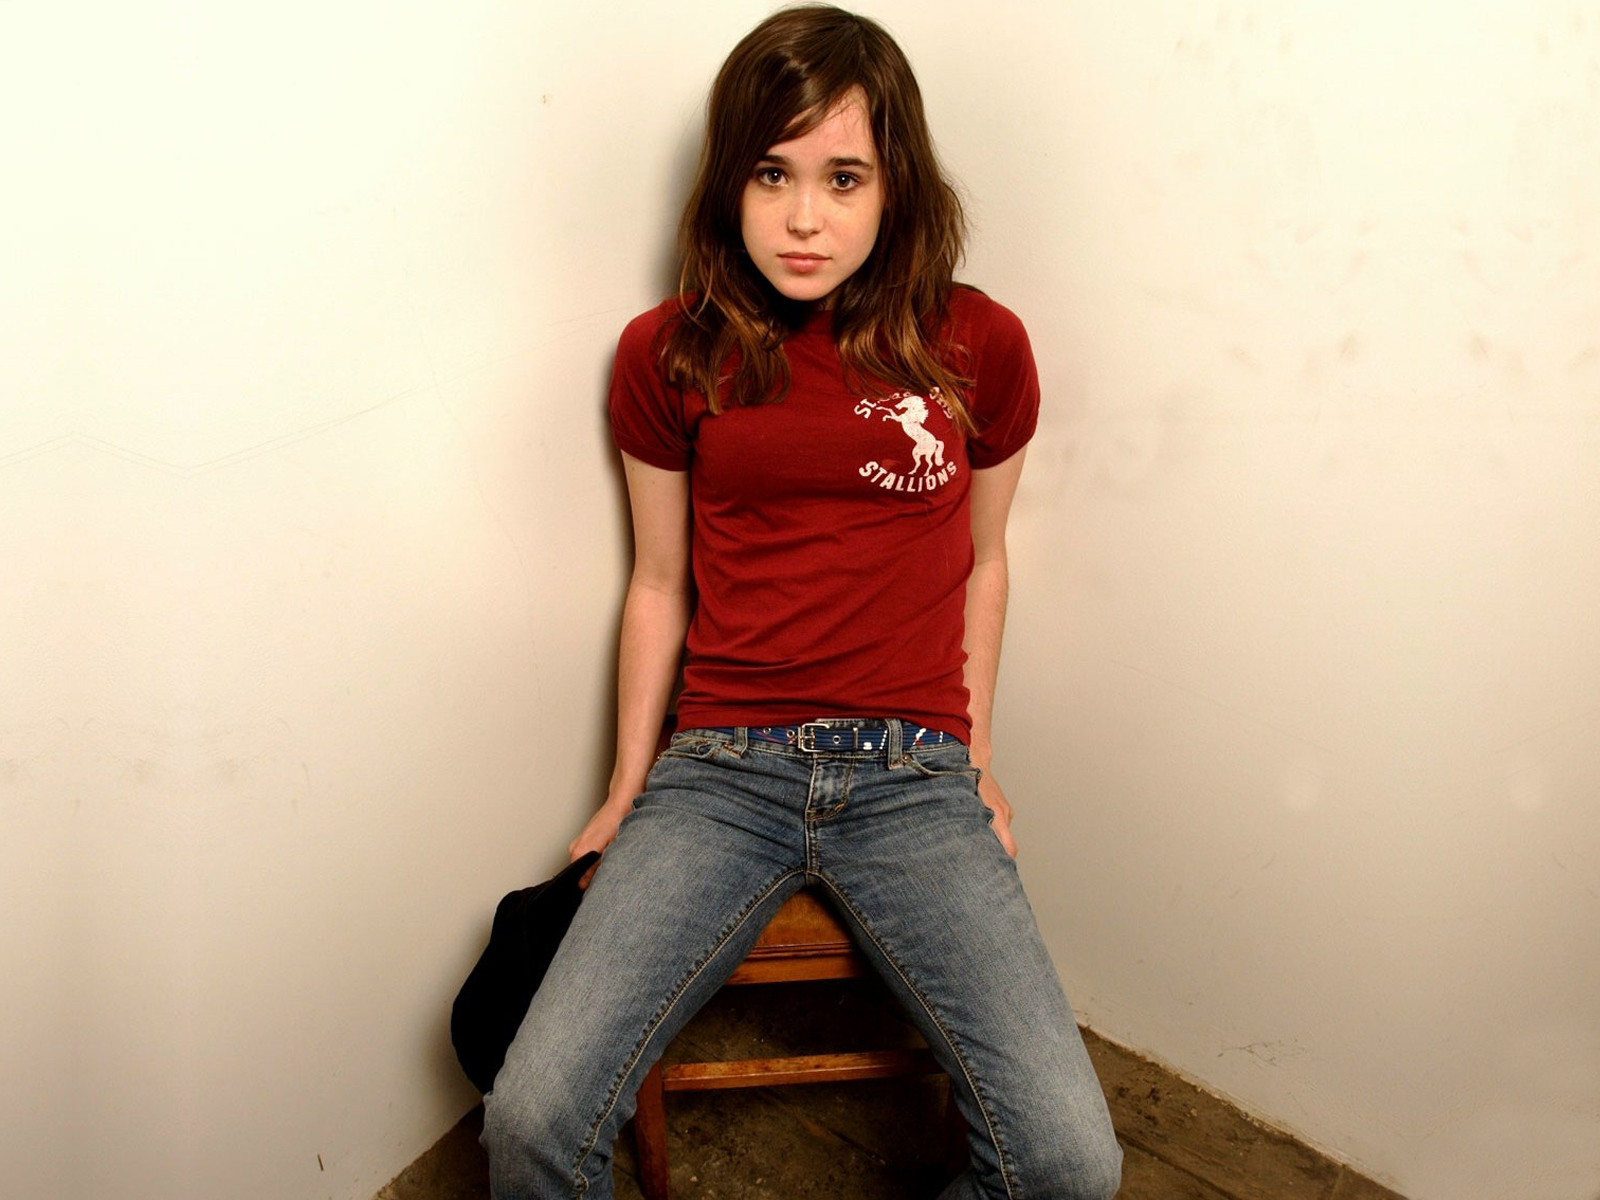 Ellen Page Hd Pic Wallpaper Hd Celebrities 4k Wallpapers Images Photos And Background